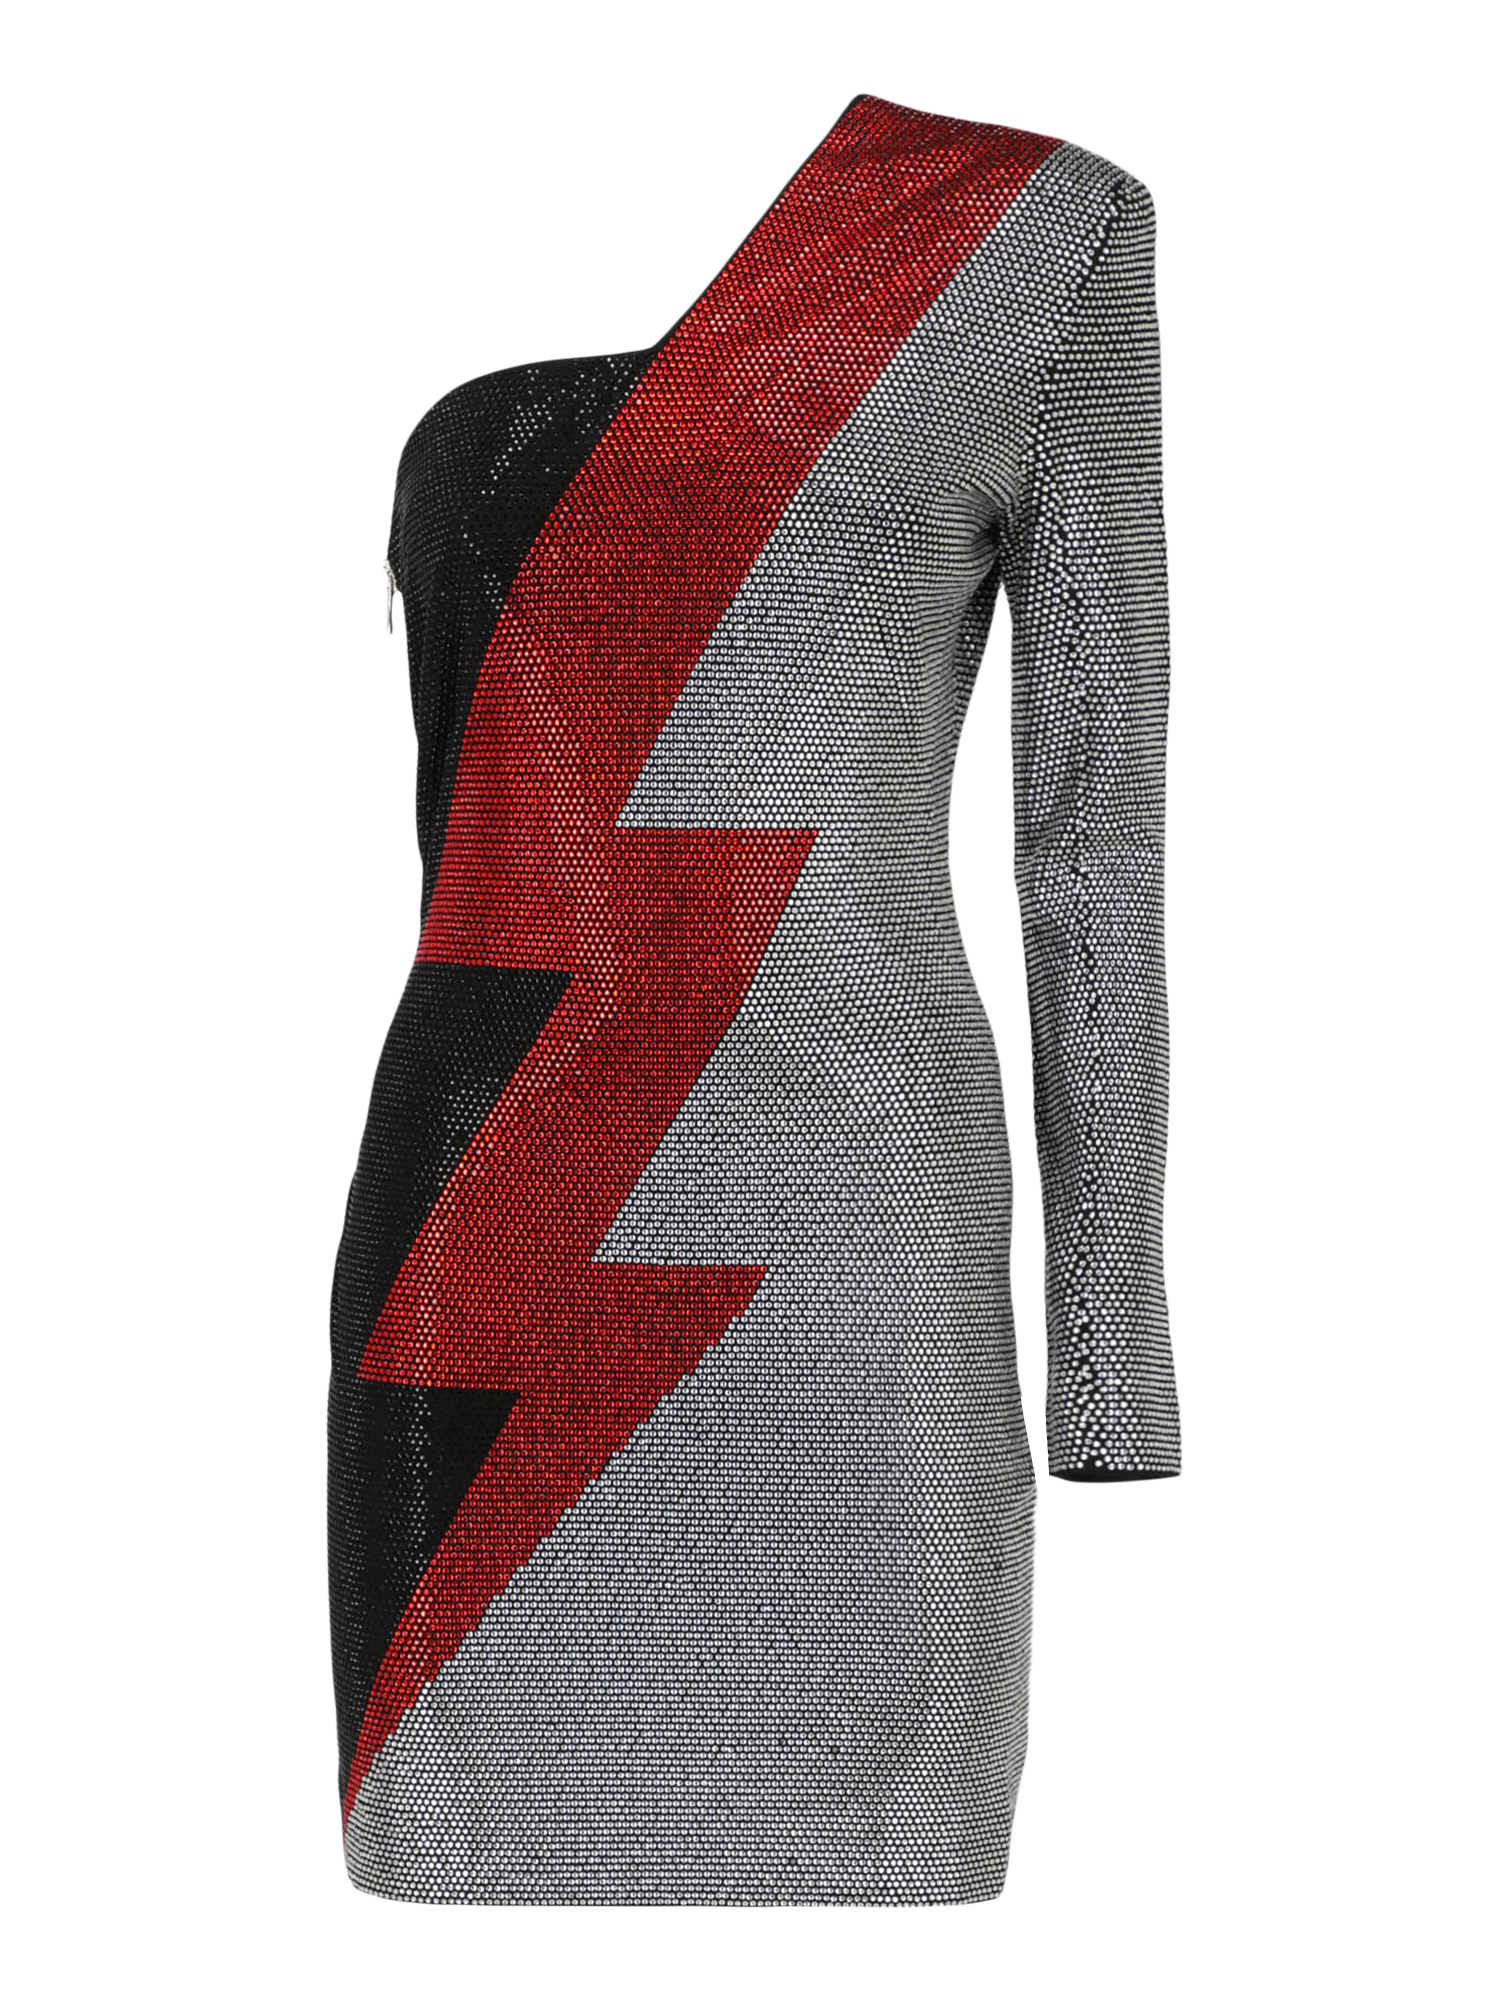 Condition: Very Good, Other Patterns Synthetic Fibers, Color: Black, Red, Silver - S - FR 36 -